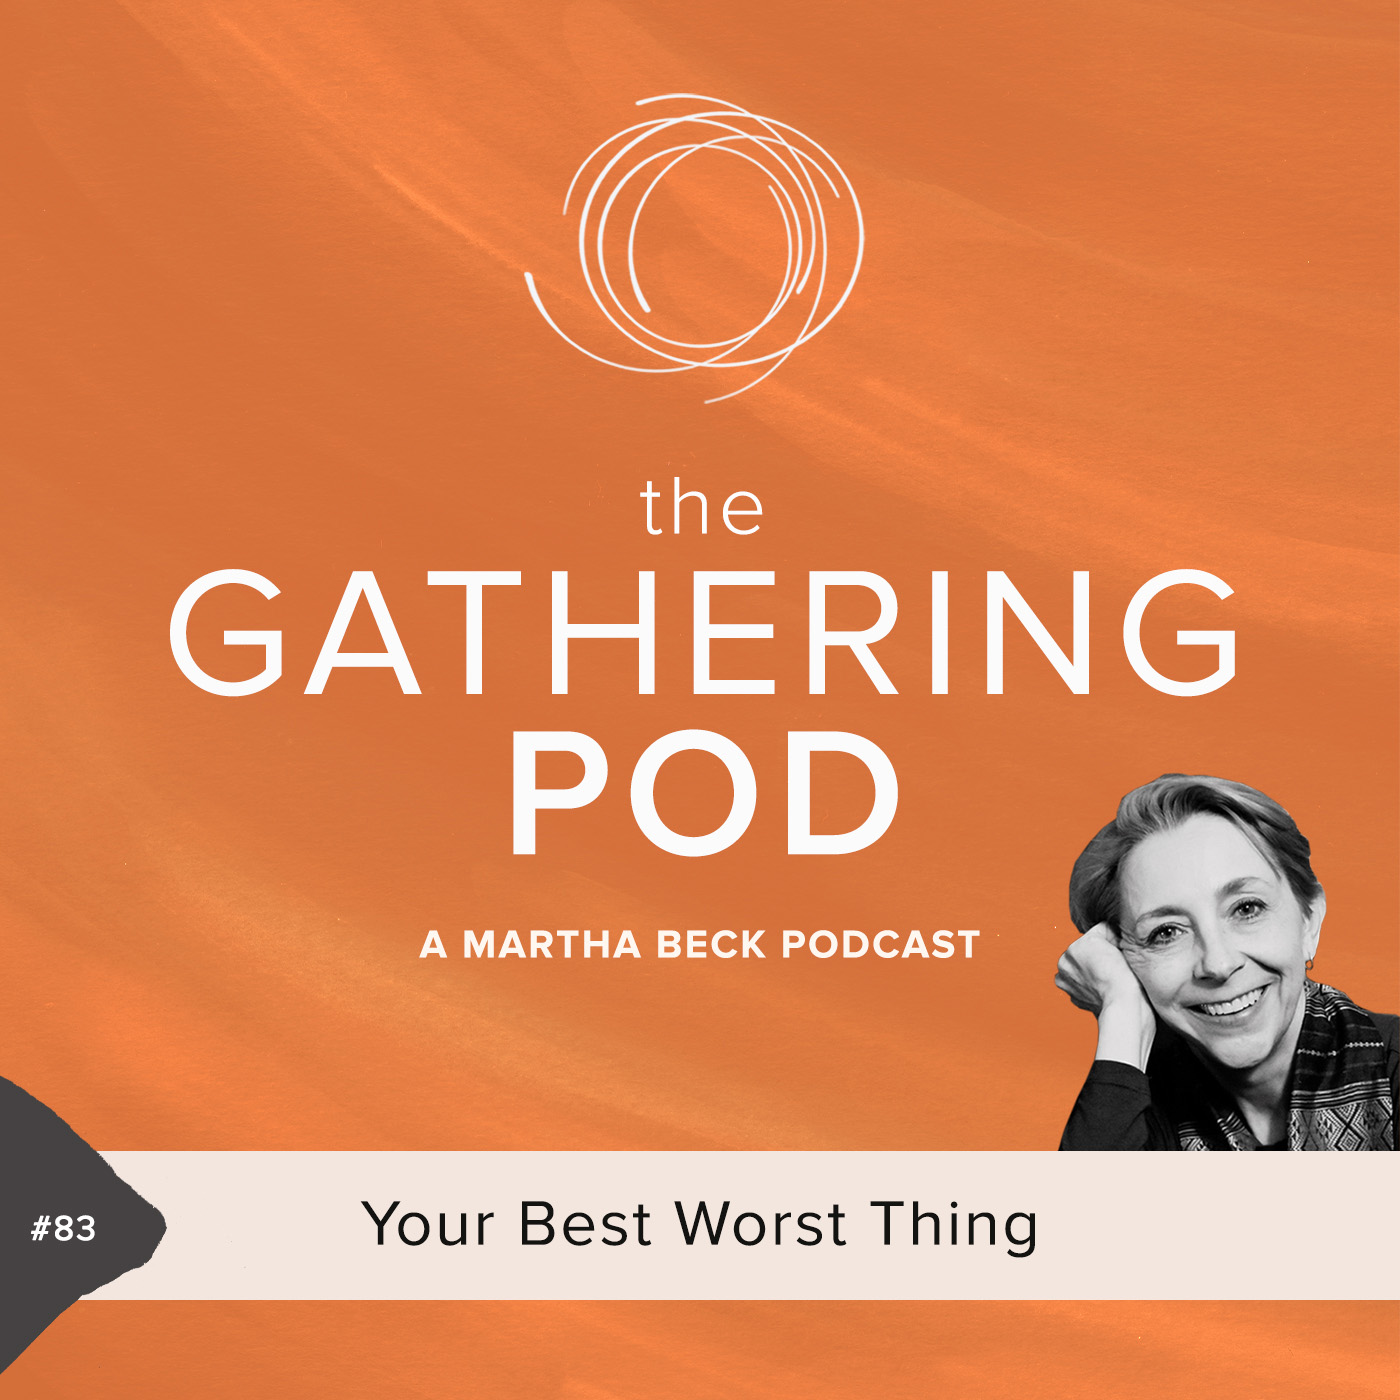 Image for The Gathering Pod A Martha Beck Podcast Episode #83 Your Best Worst Thing